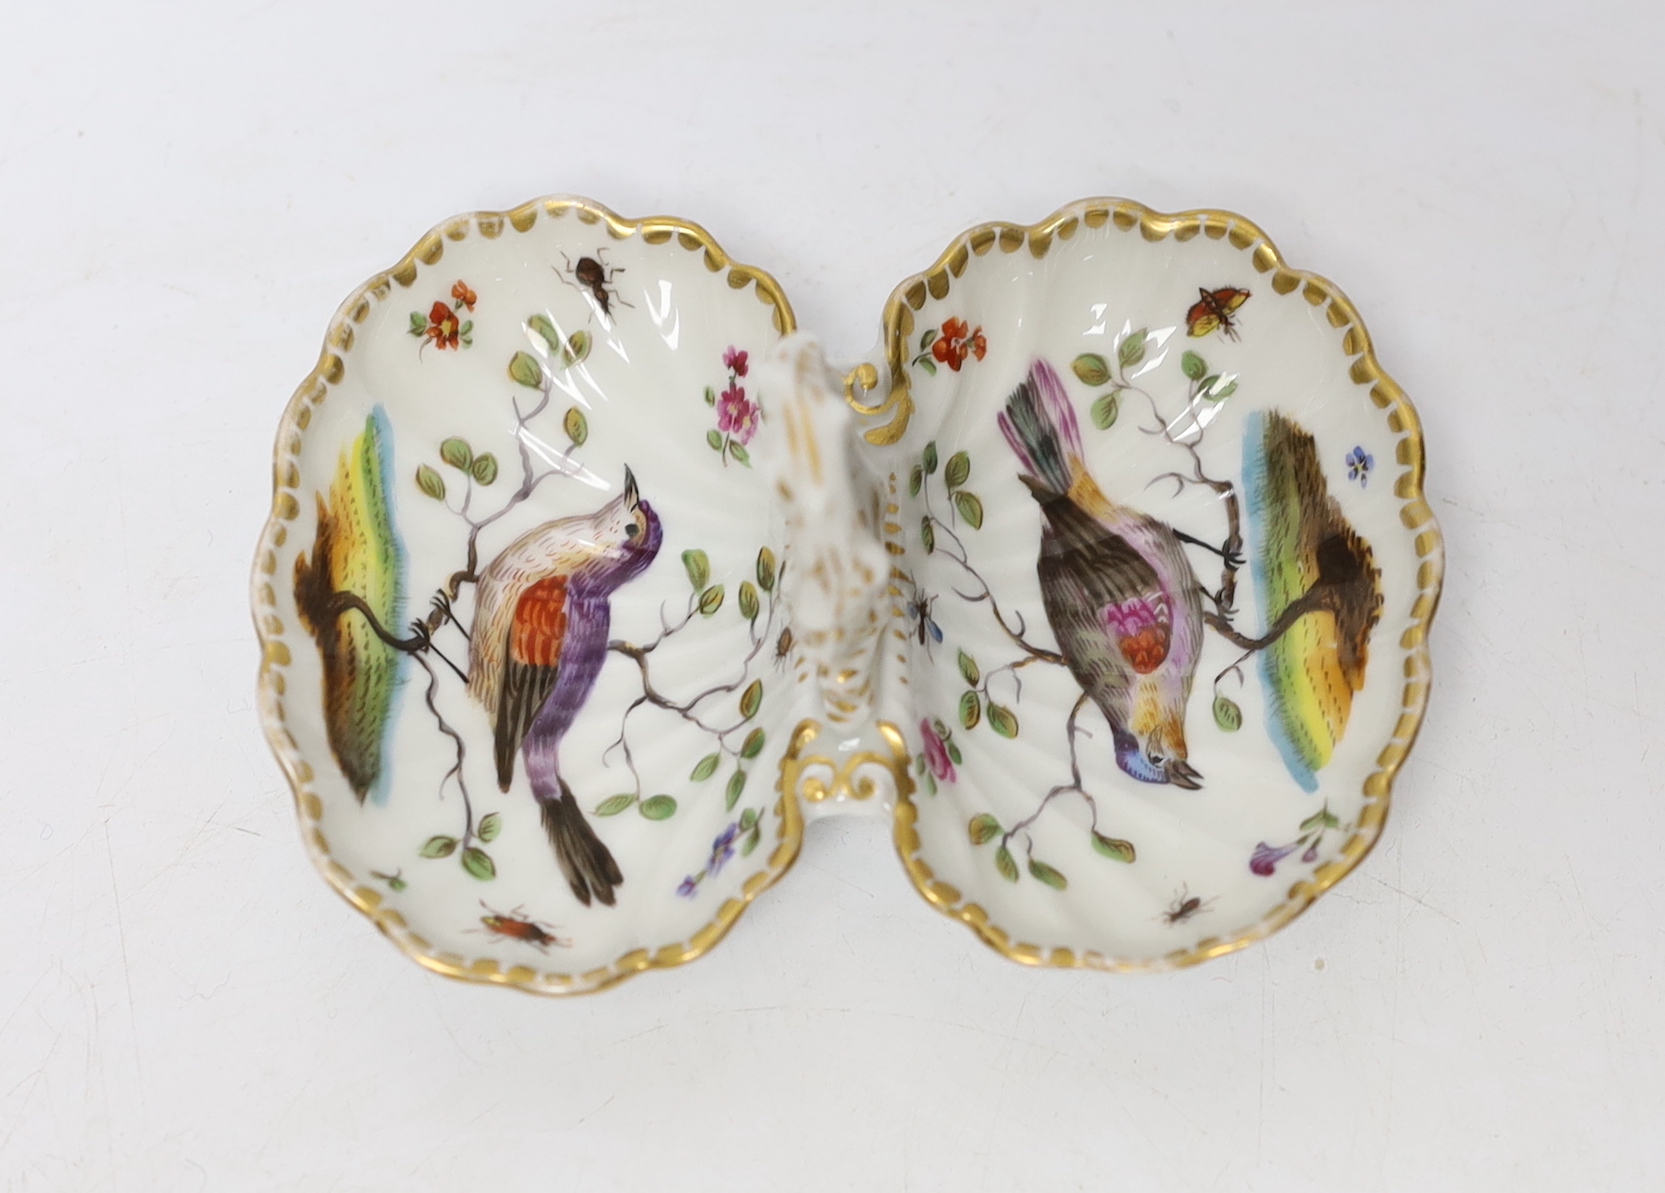 A small 19th century Meissen double shell dish, diameter 11cm